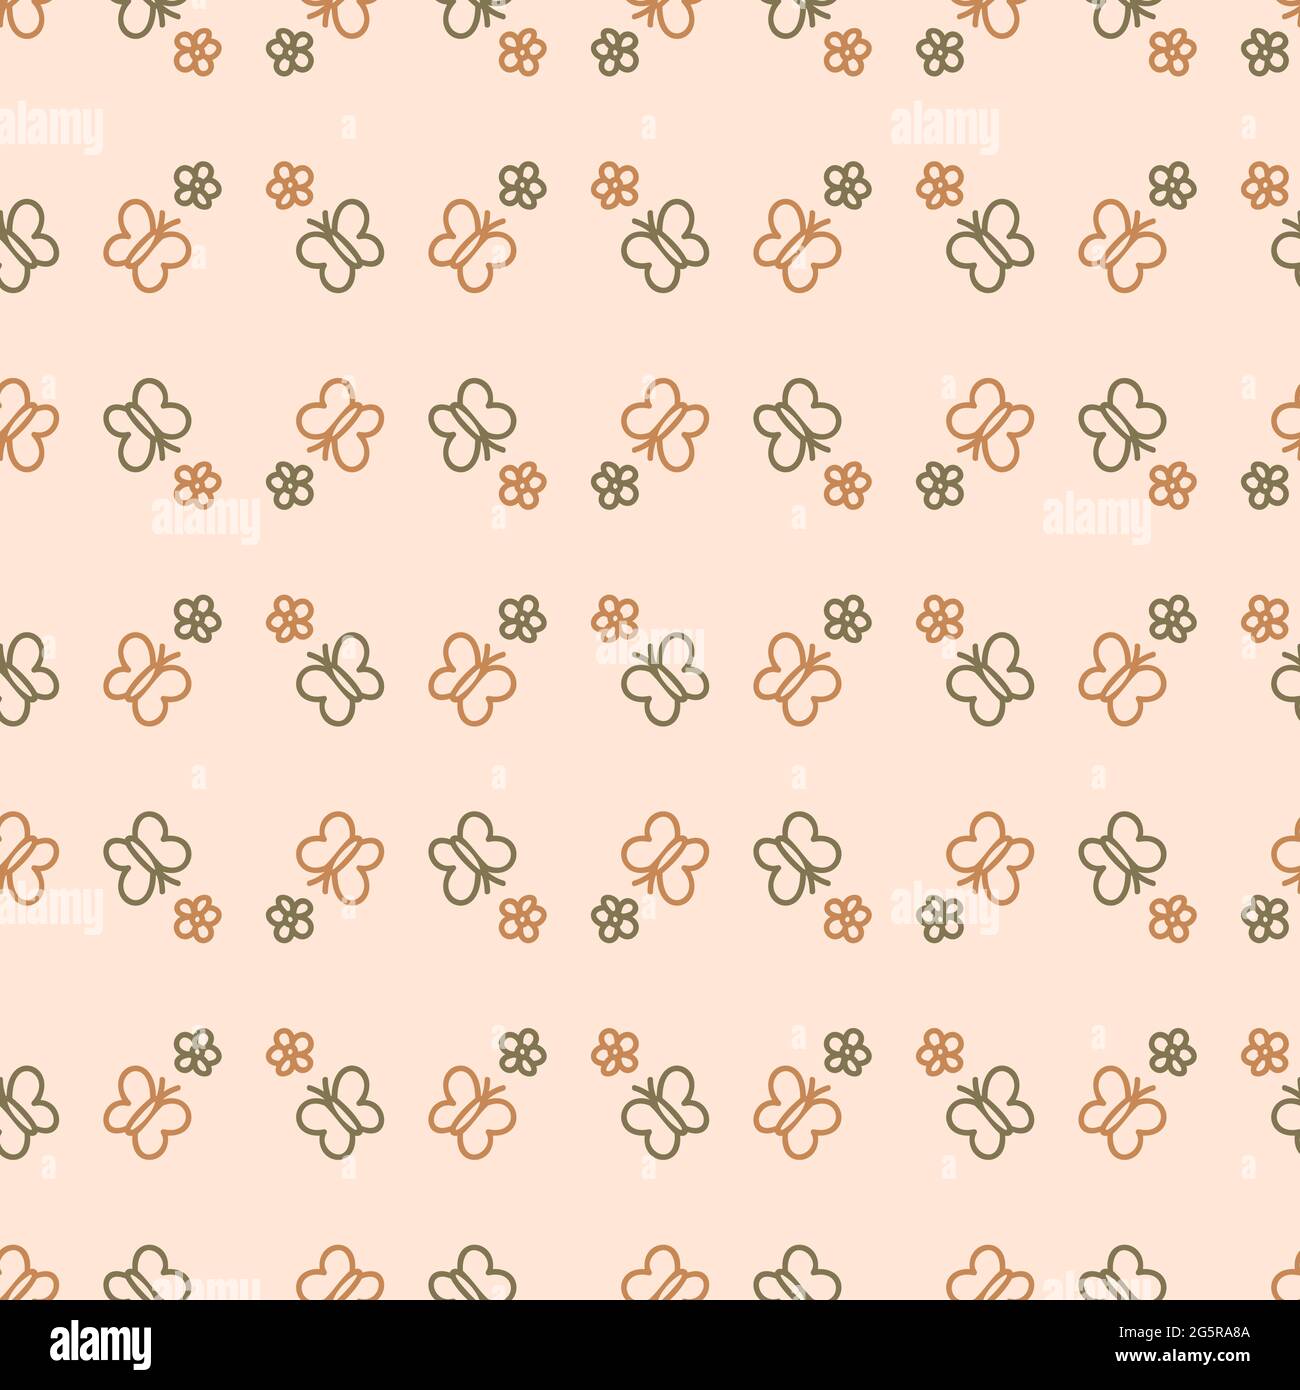 lv and butterfly wallpaper